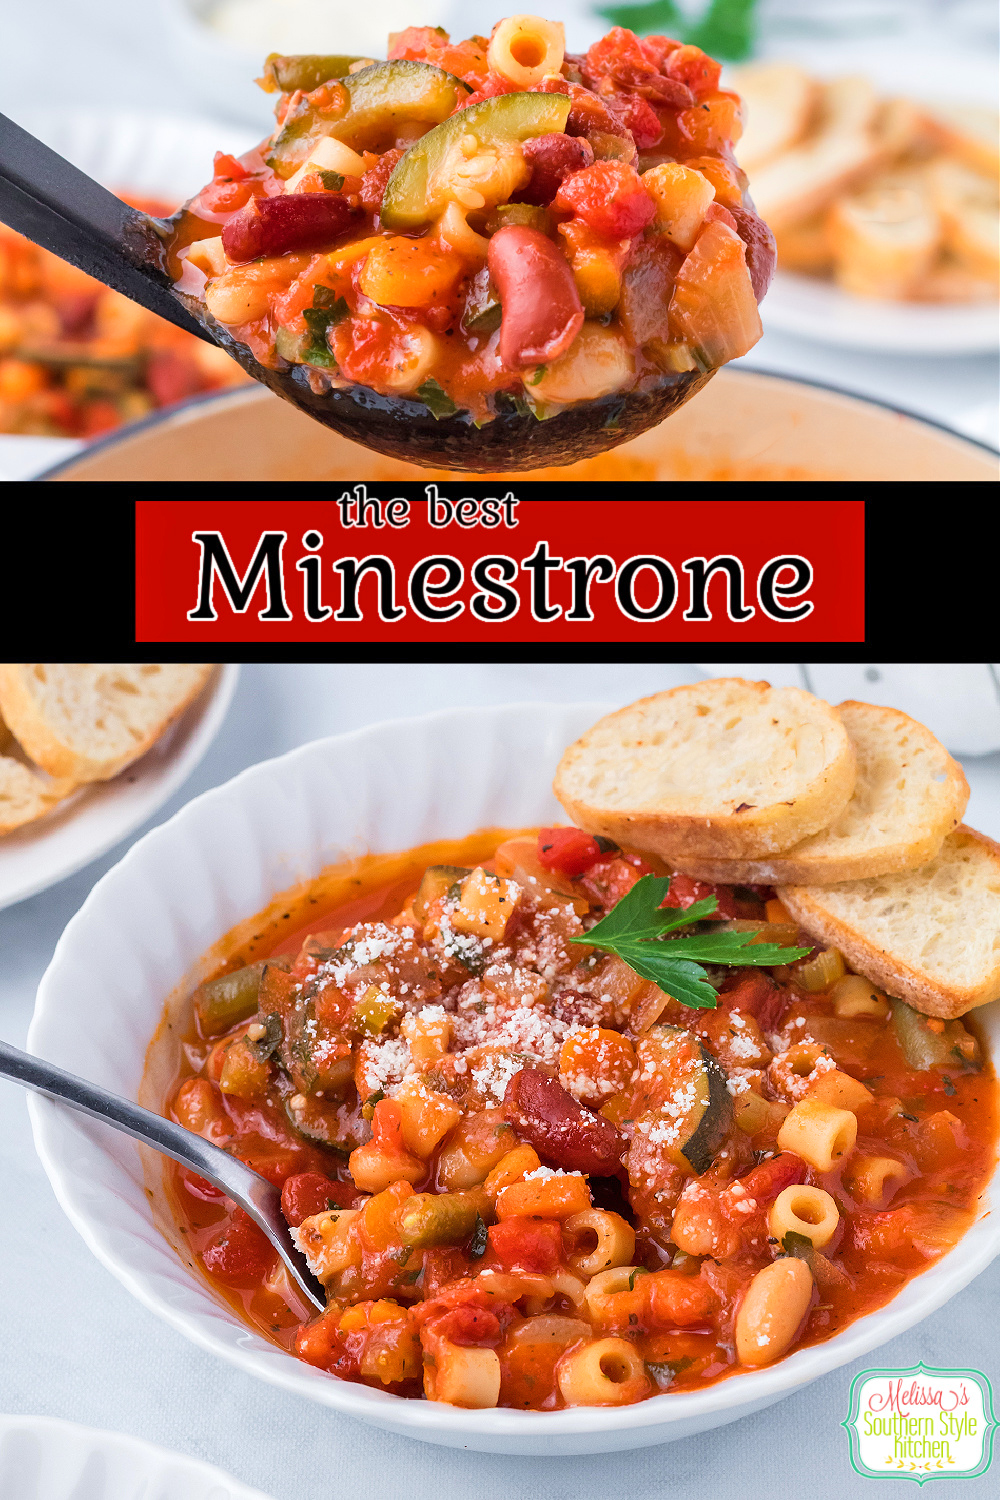 This Homemade Minestrone Recipe is packed with vibrant colors and fresh flavors making this one pot meal a winner any day of the week #minestronerecipe #easyminestrone #soup #souprecipes #meatlesssouprecipes #bestminestrone #vegetablesoup #ditilinipasta